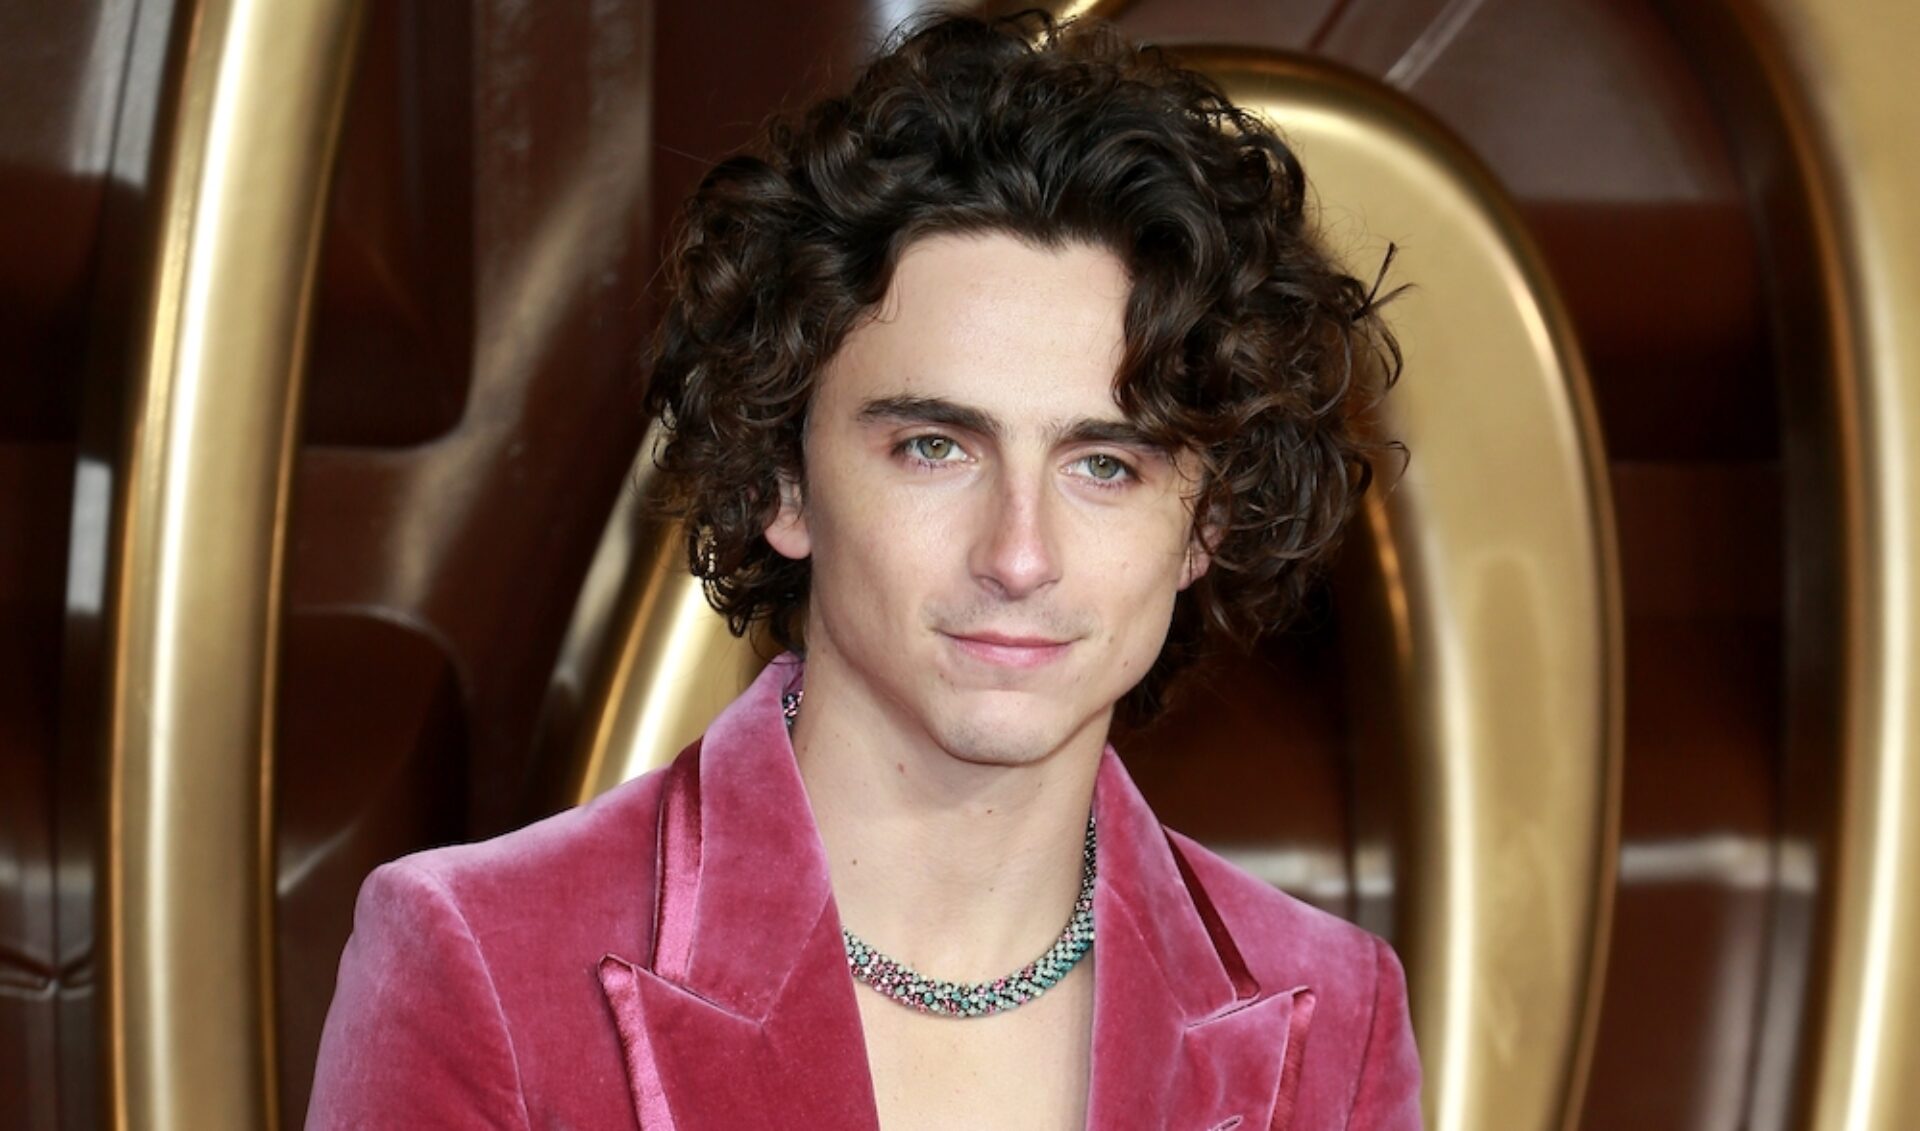 In an interview with Rolling Stones, Wonka director, Paul King shared how Timothée Chalamet's High School YouTube Videos landed him the Willy Wonka role.